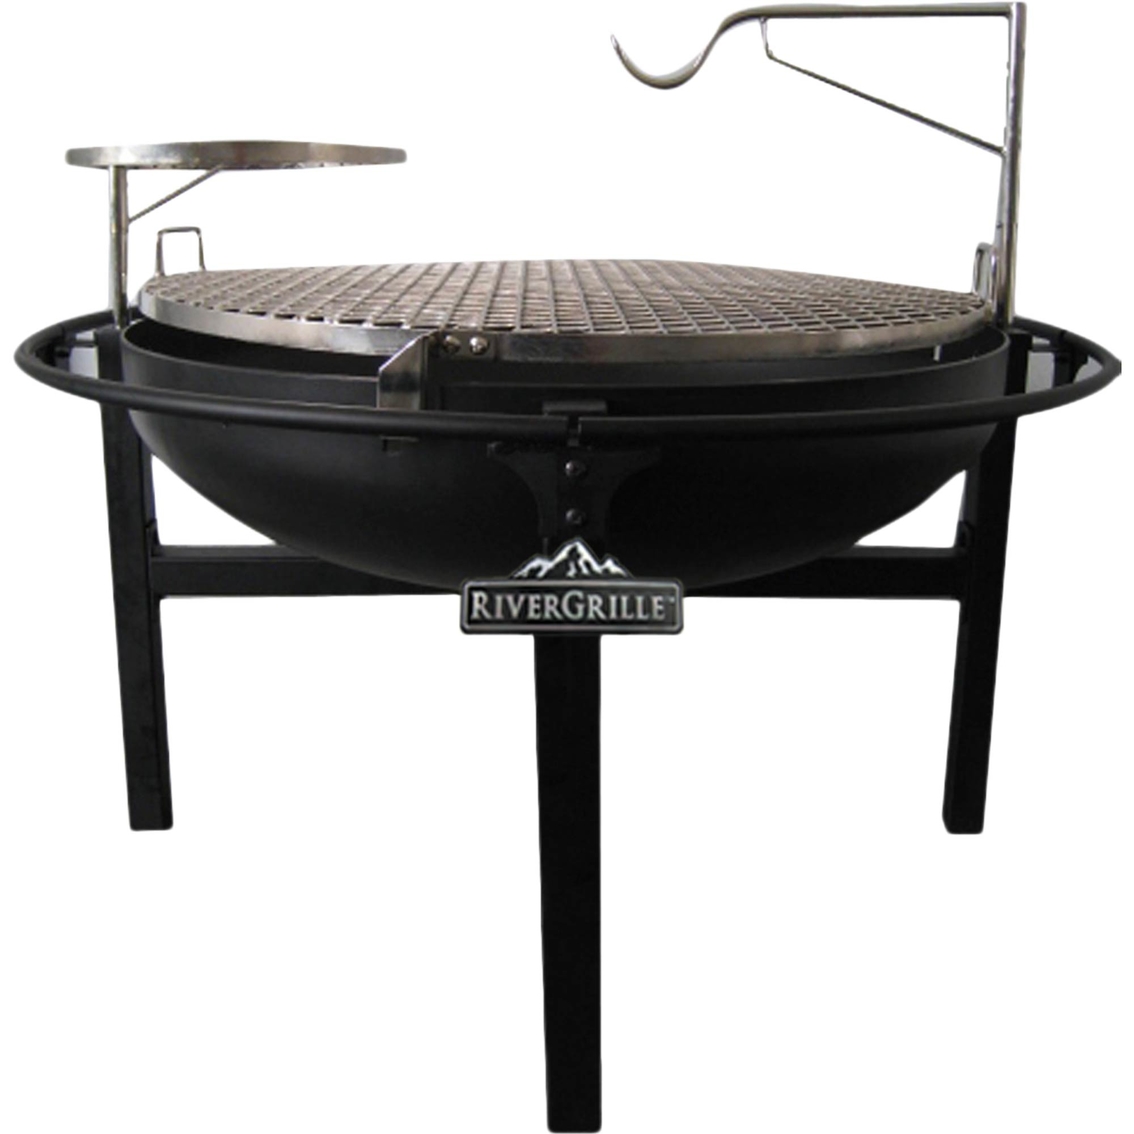 Rivergrille Cowboy Fire Pit Grill, Cowboy Fire Pit Grill Accessories